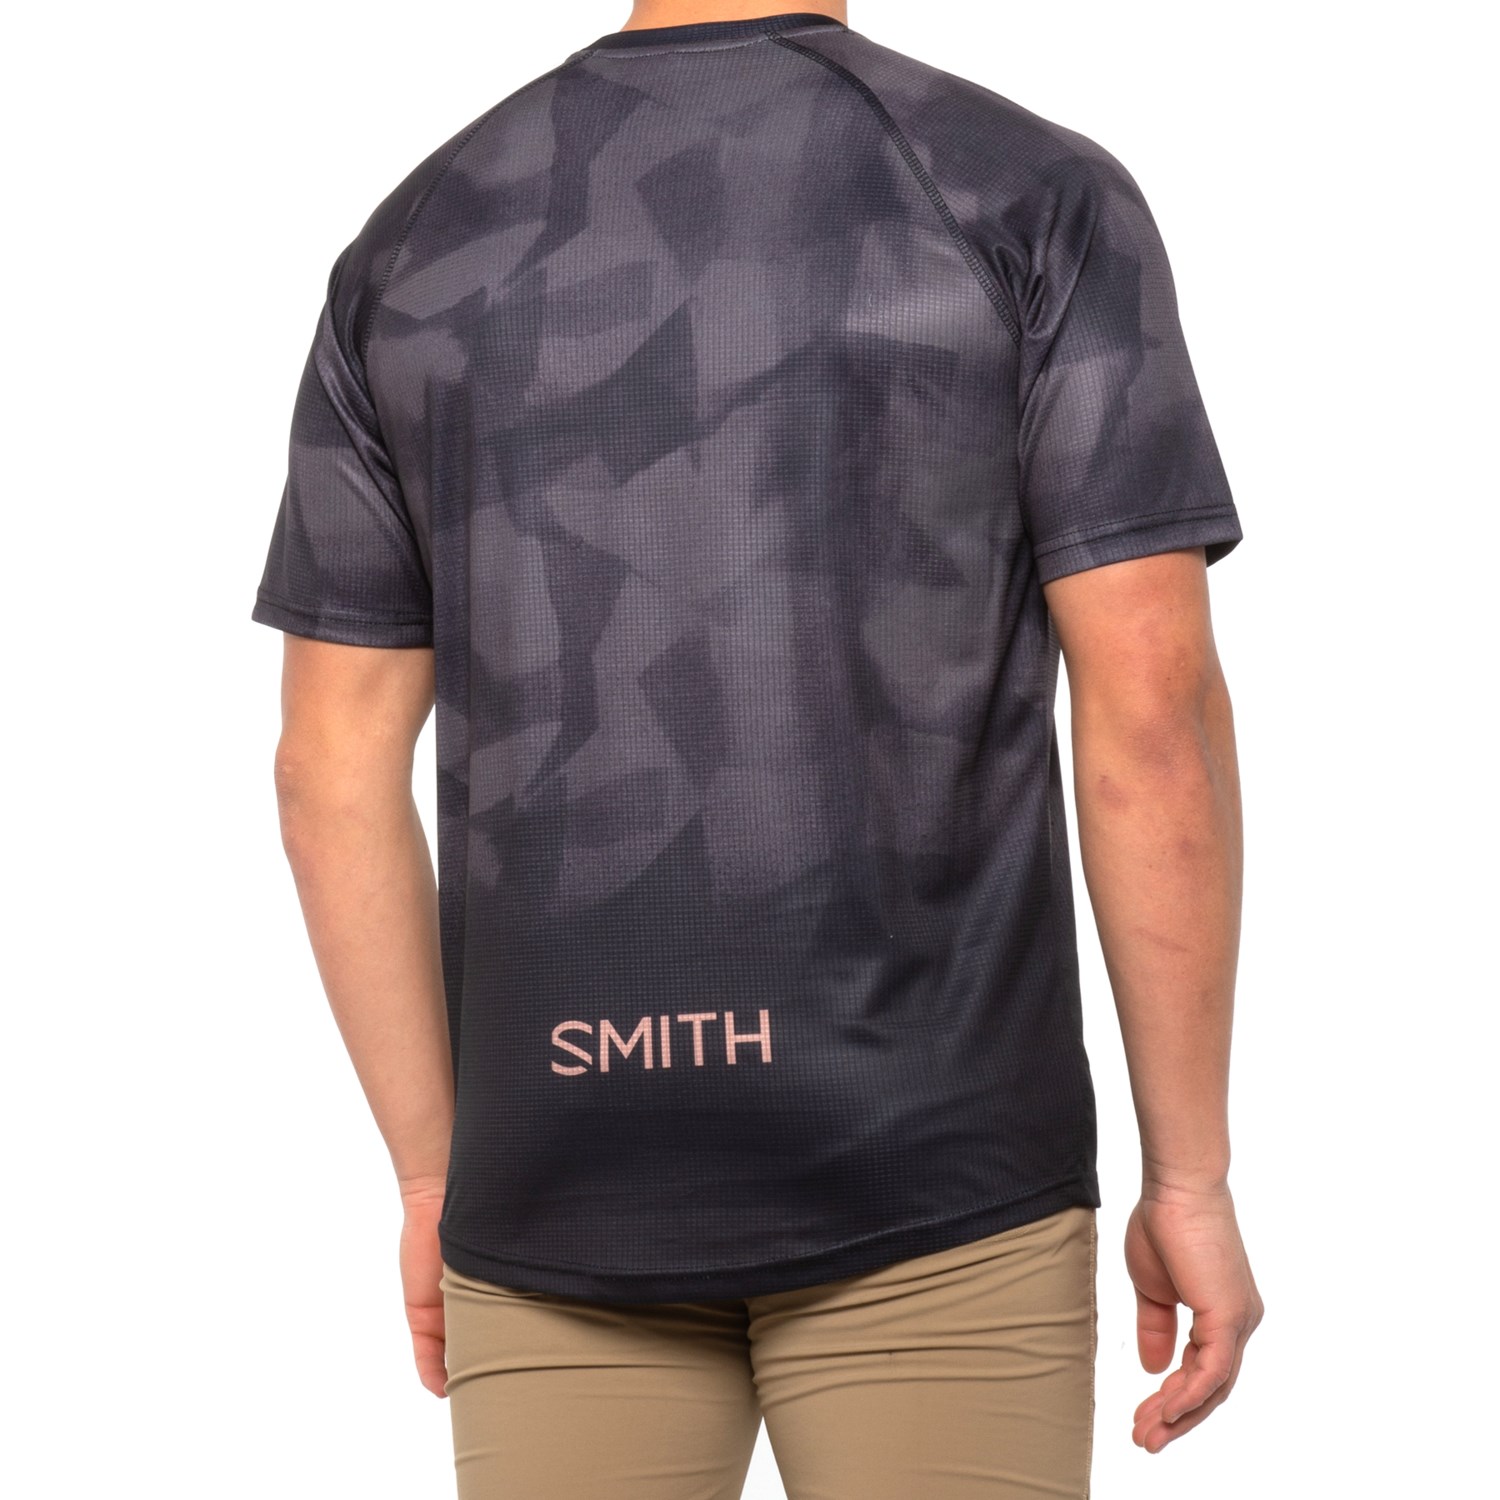 smith cycling jersey